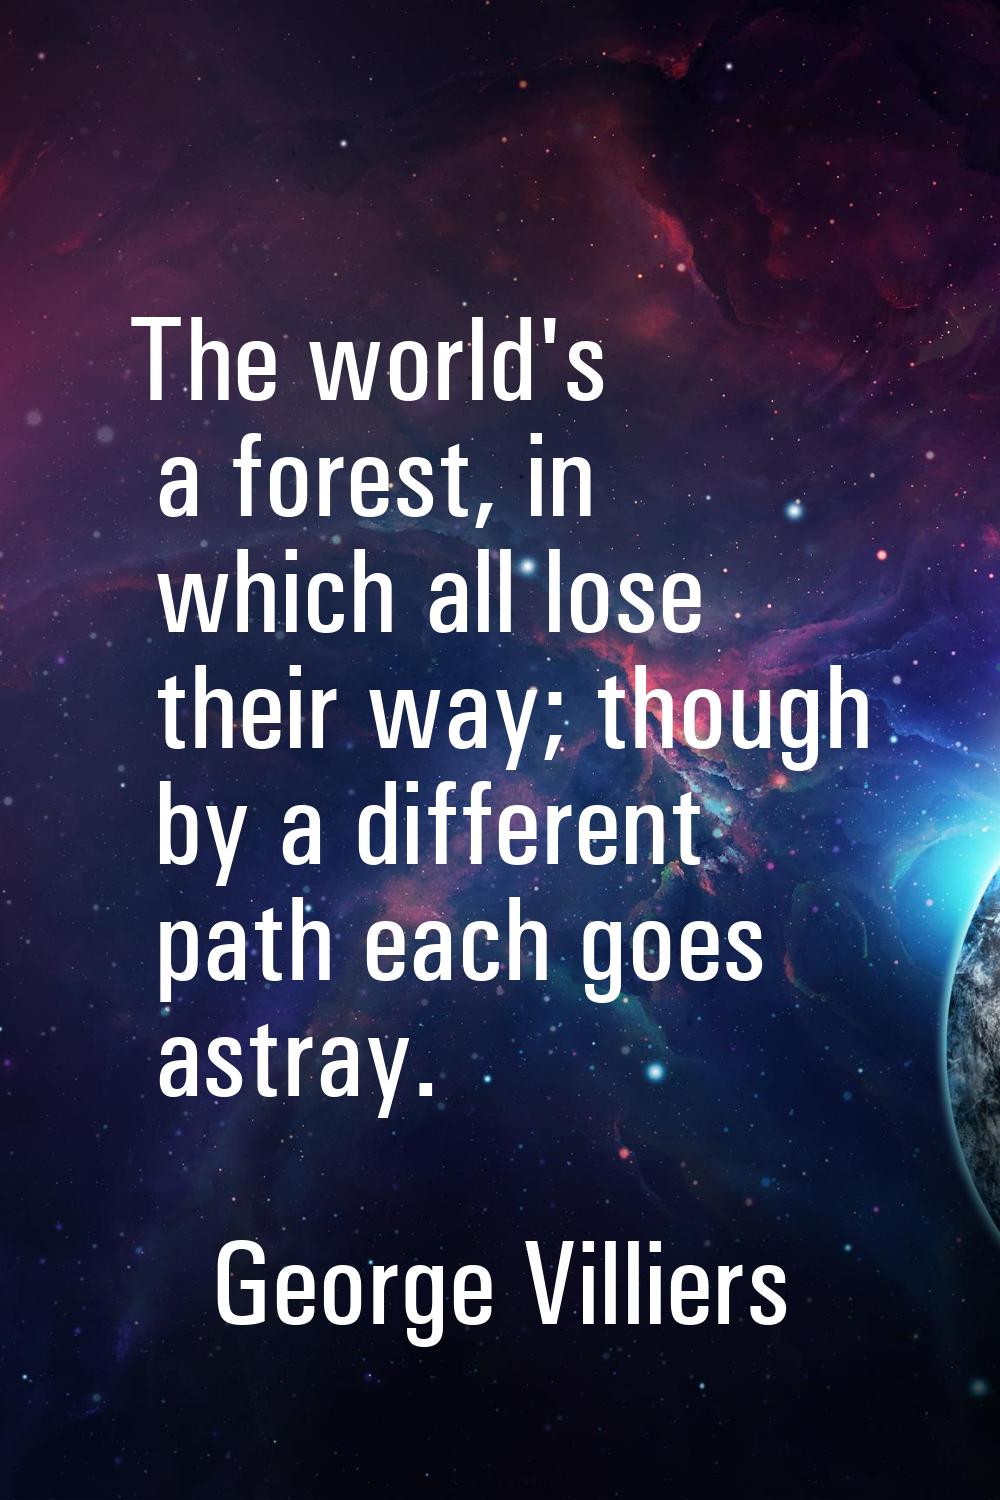 The world's a forest, in which all lose their way; though by a different path each goes astray.